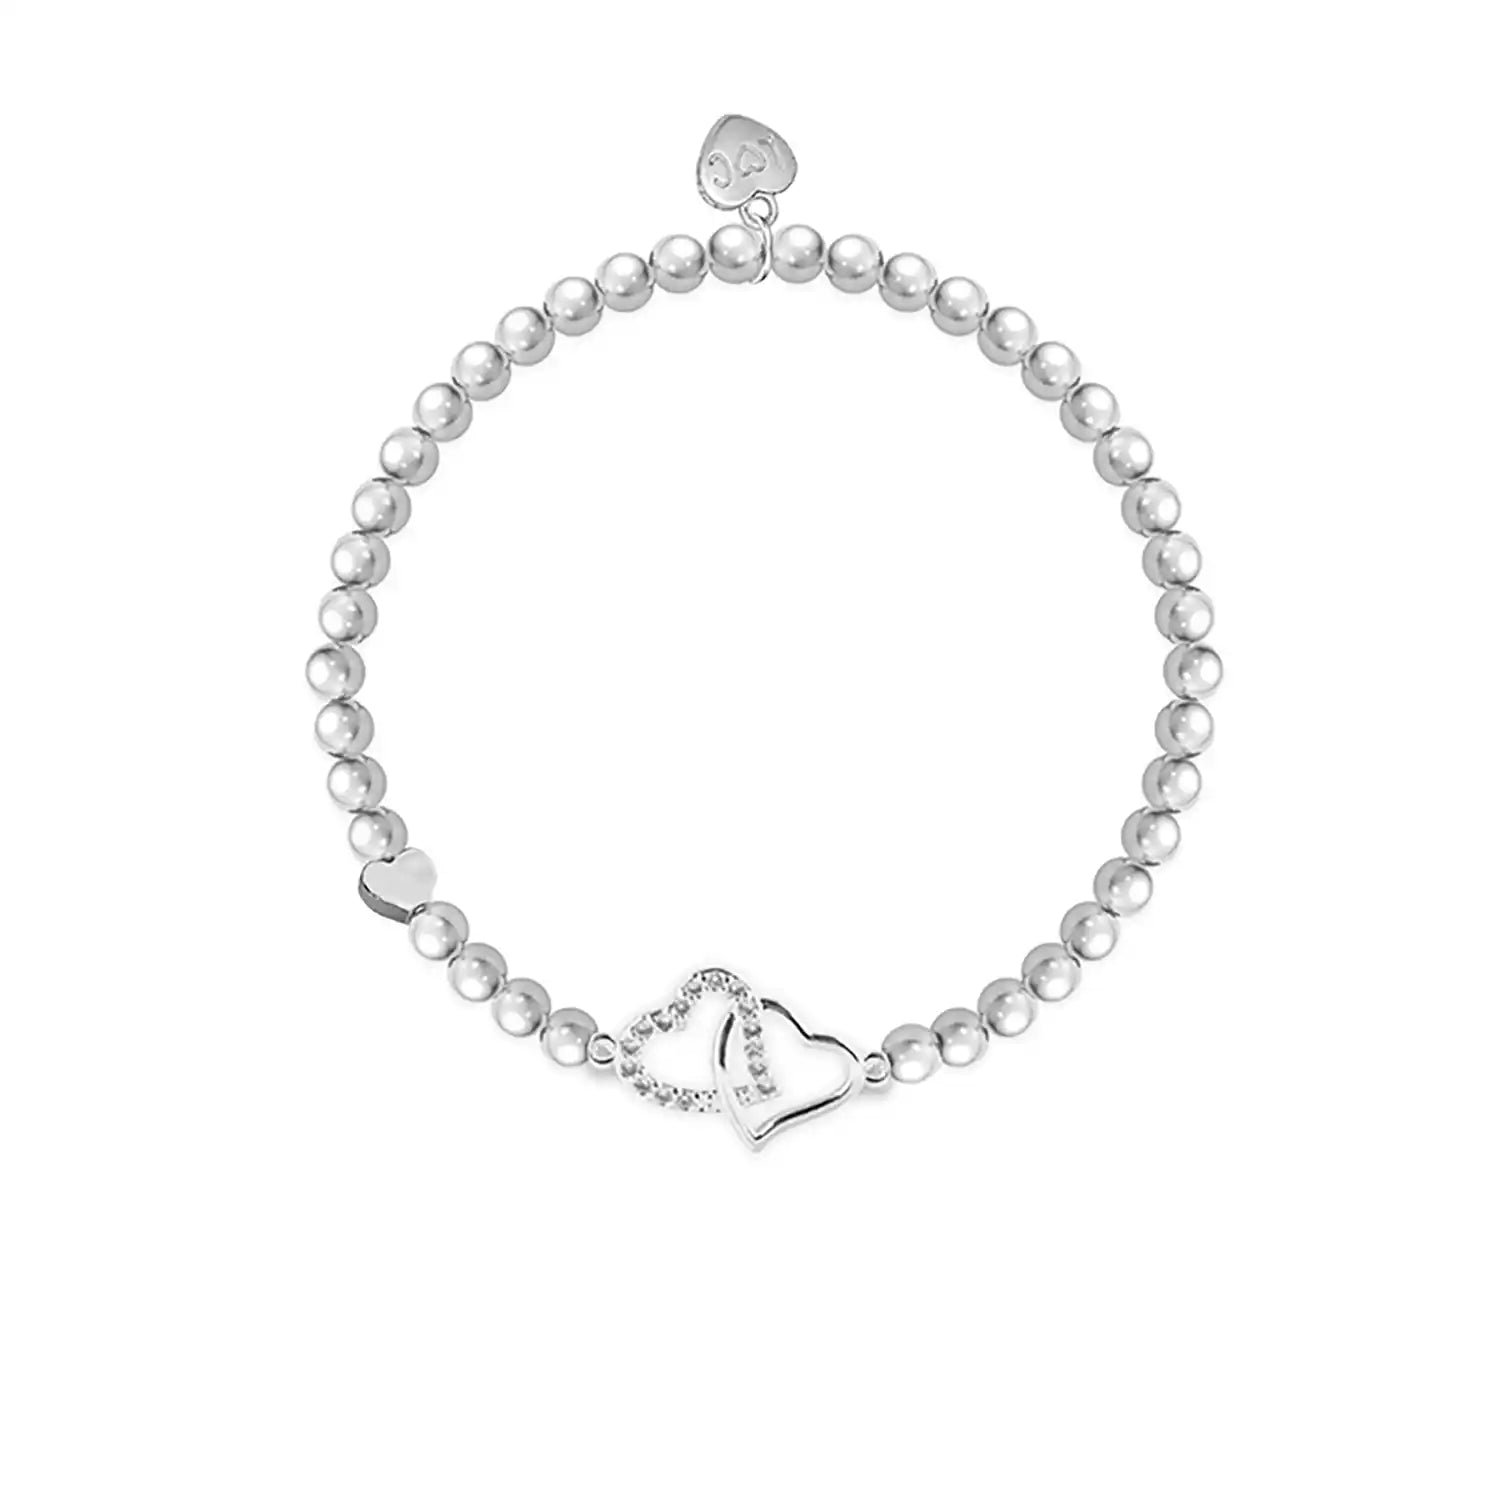 Life Charms Super Sister Bracelet - Silver 1 Shaws Department Stores